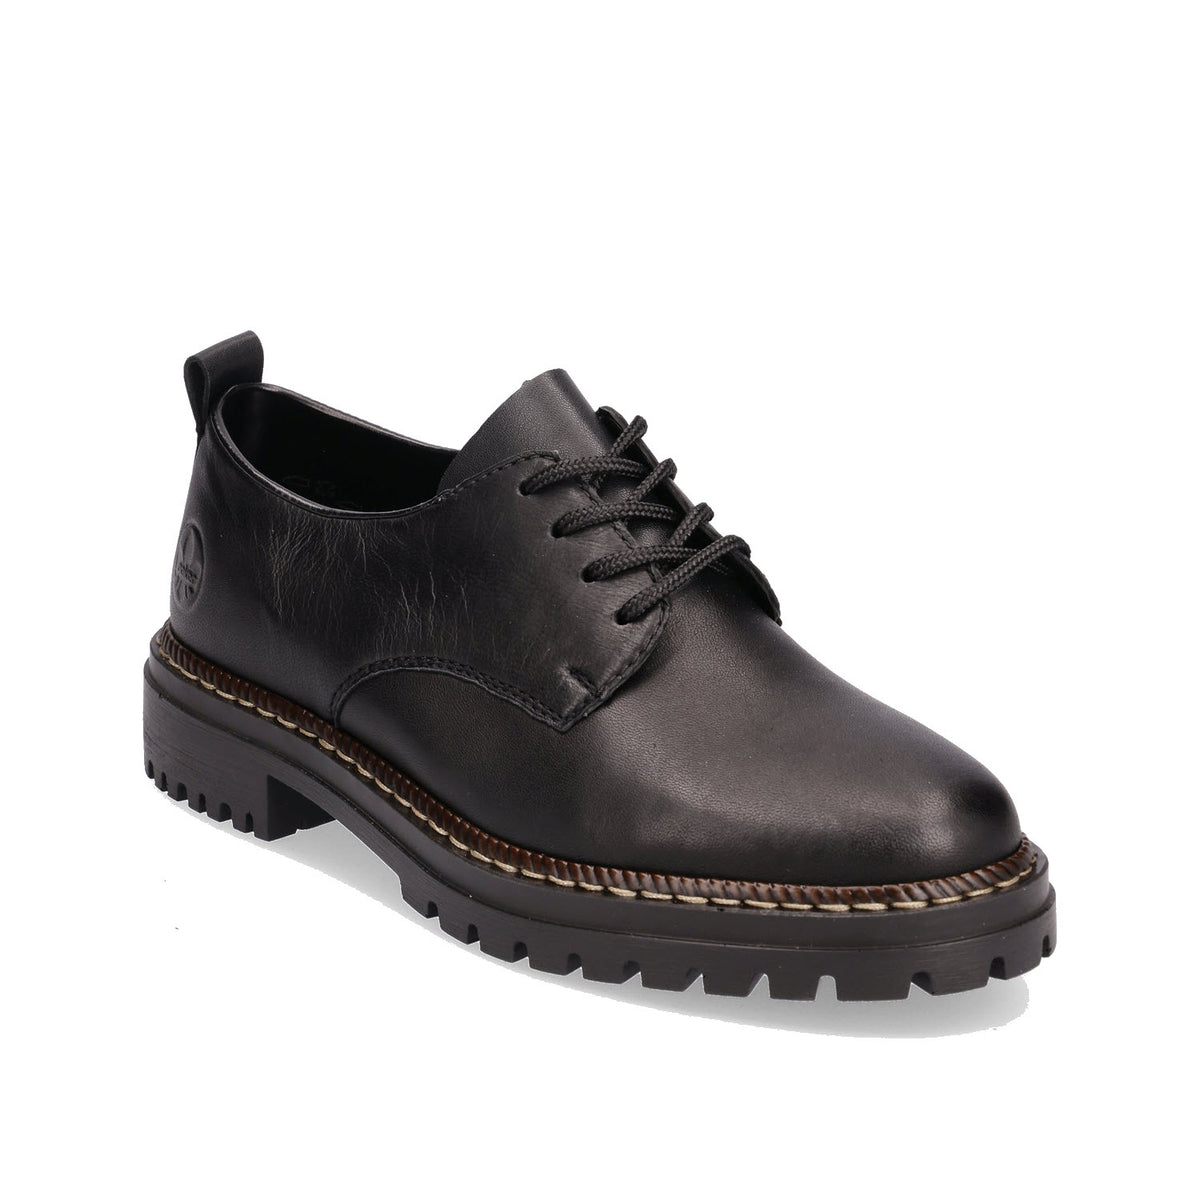 RIEKER Modern Tailored Oxford Black - Women&#39;s leather business shoe with thick rubber sole and antistress qualities.